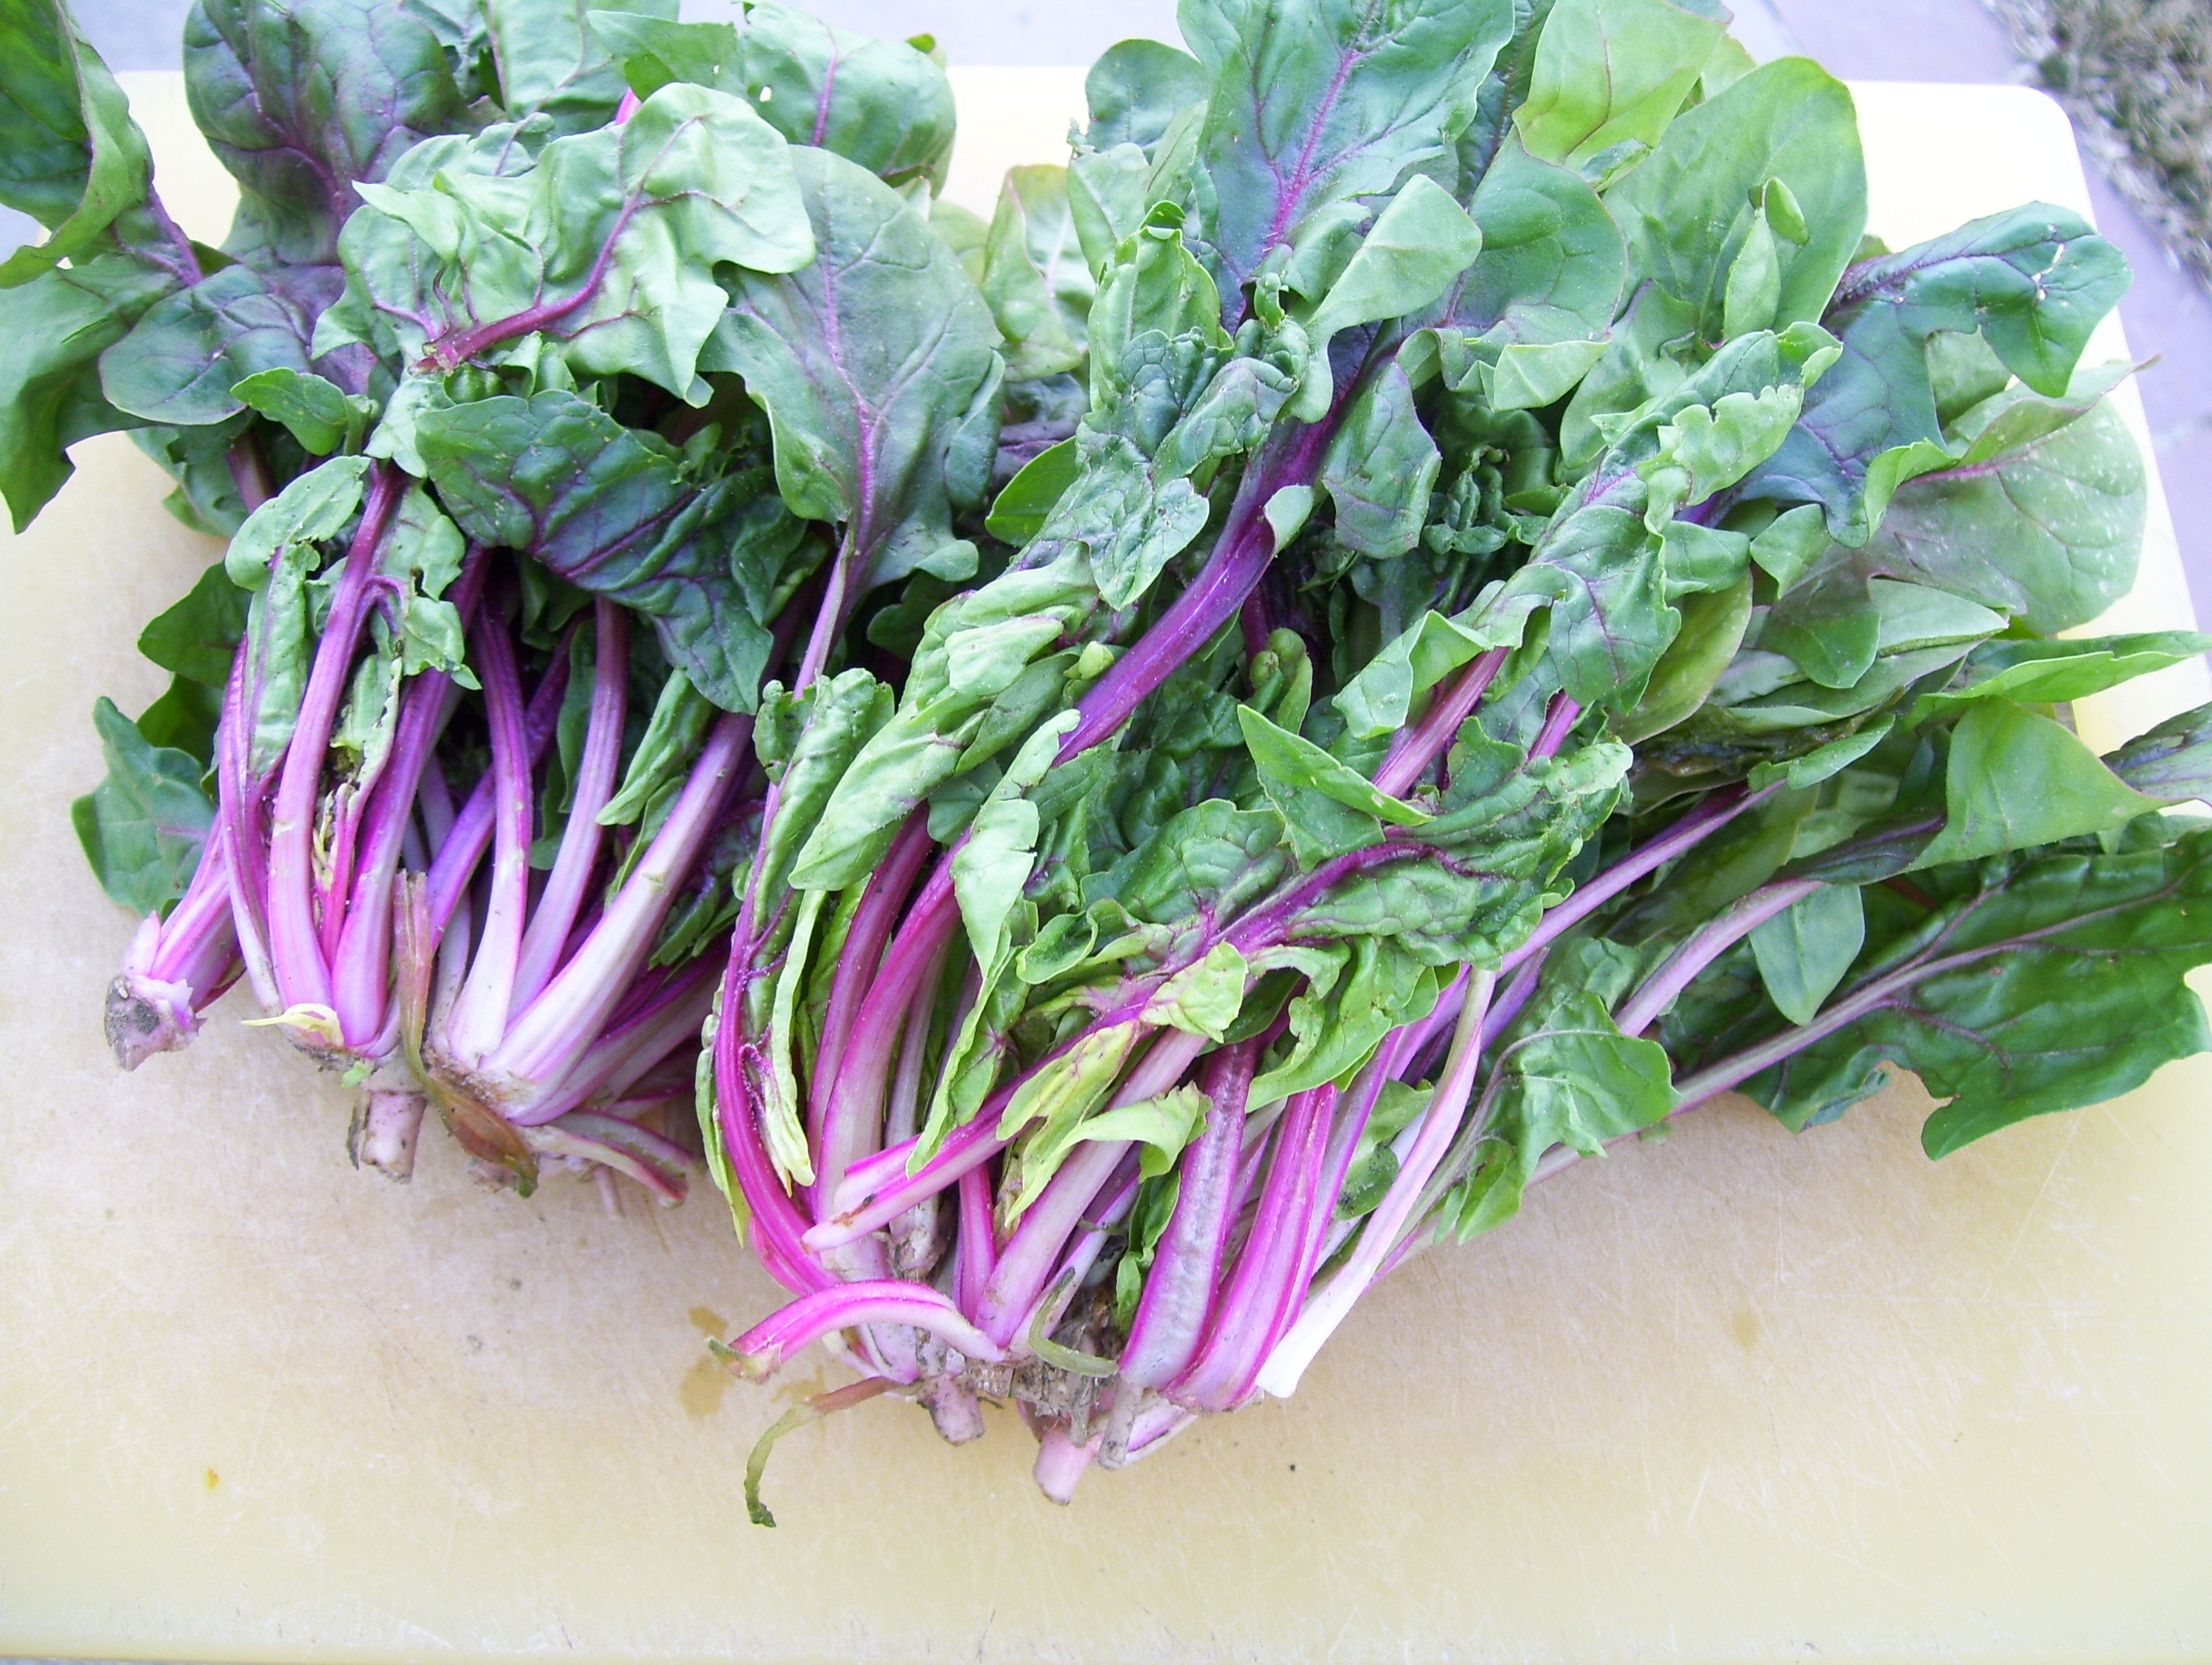 Bordeaux Spinach:  Check out the deep red stems